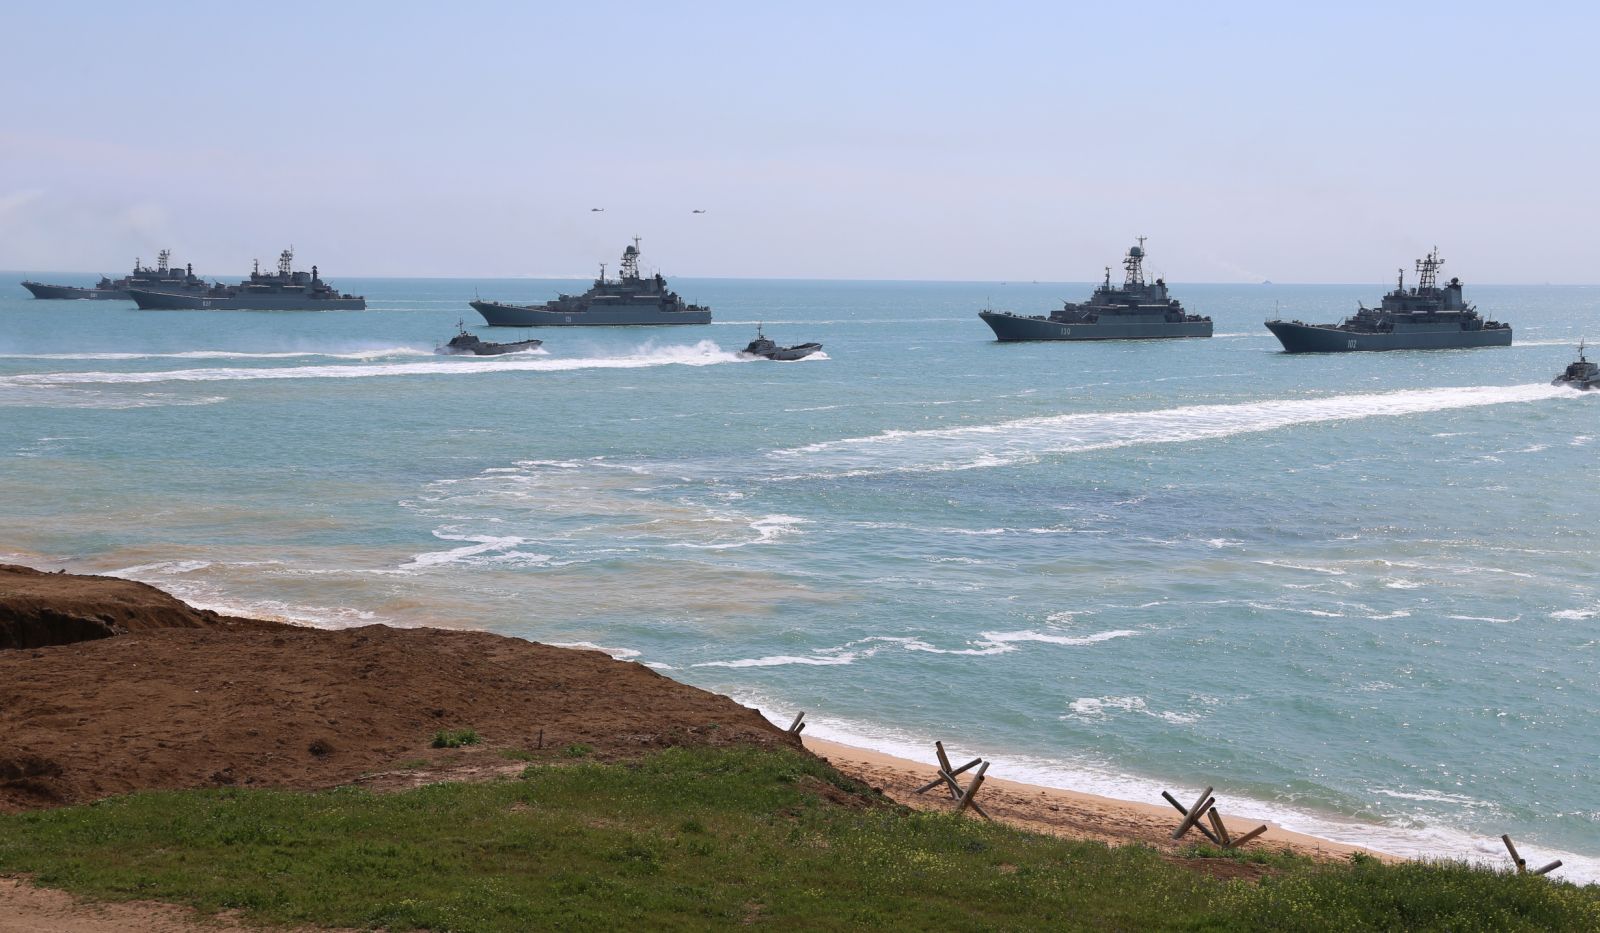 epa09152959 A handout photo made available by the press service of the Russian Defence Ministry shows Russian Navy large landing ships during the main stage of the mixed exercise of the Russian Armed Forces at the at Opuk range  in Crimea, 22 April 2021. Units of the combined arms army, air force and air defen–e formations, warships and ships, military units of the coastal forces of the Black Sea Fleet, part of the forces of the Caspian Flotilla and airborne units take part in the military exercises at the Opuk training ground.  EPA/VADIM SAVITSKY / RUSSIAN DEFENCE MINISTRY / HANDOUT MANDATORY CREDIT / HANDOUT EDITORIAL USE ONLY/NO SALES